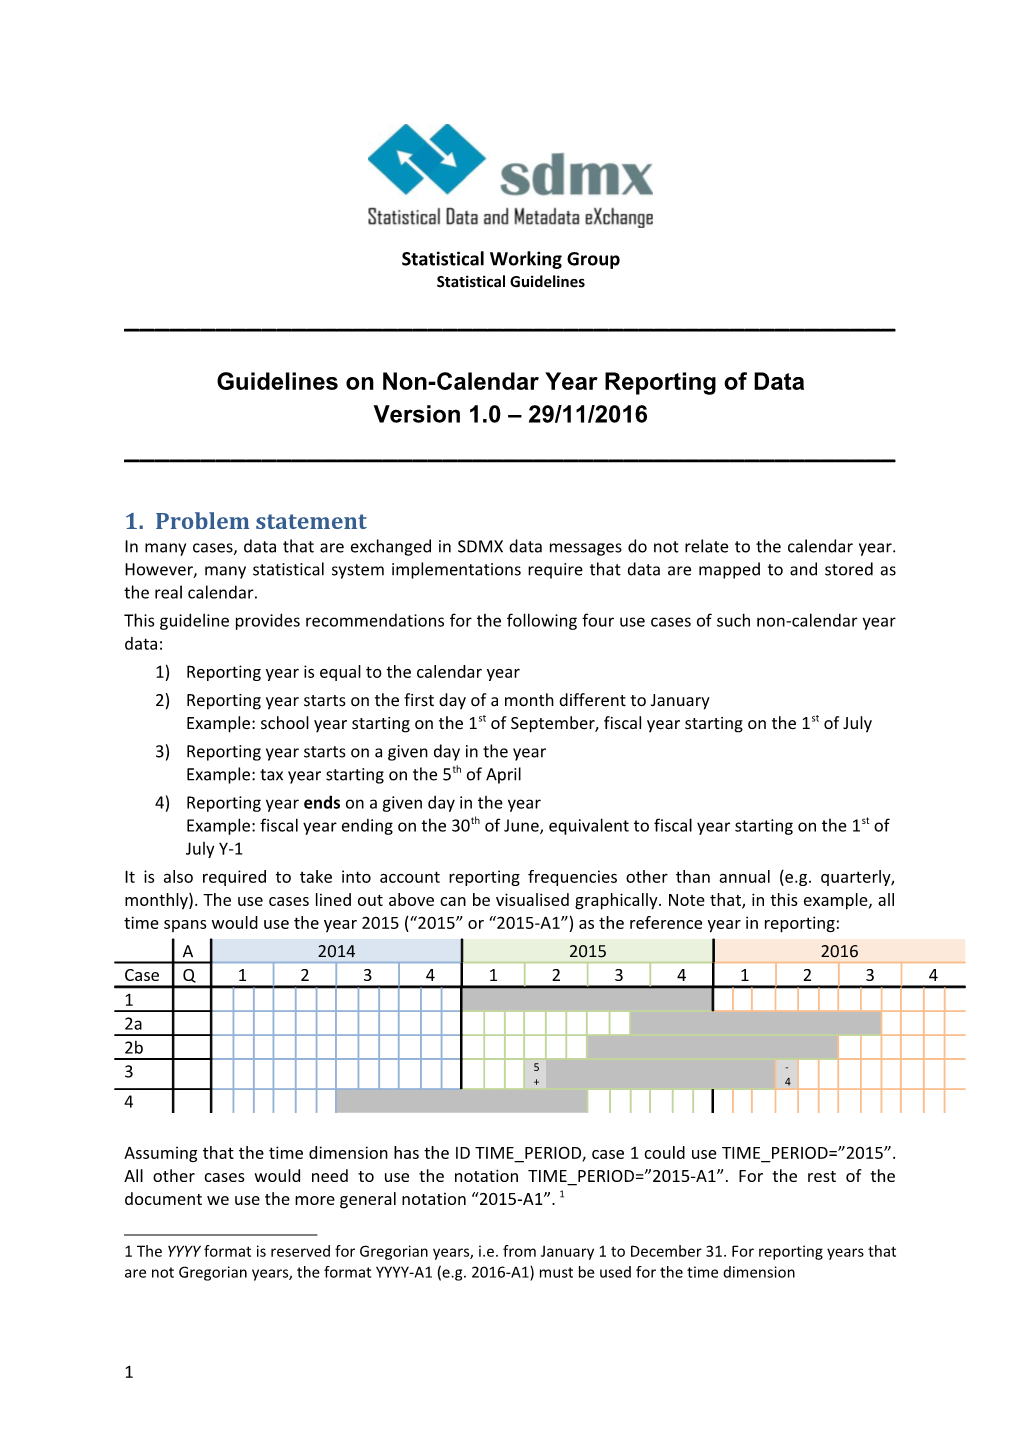 Guidelines on Non-Calendar Year Reporting of Data